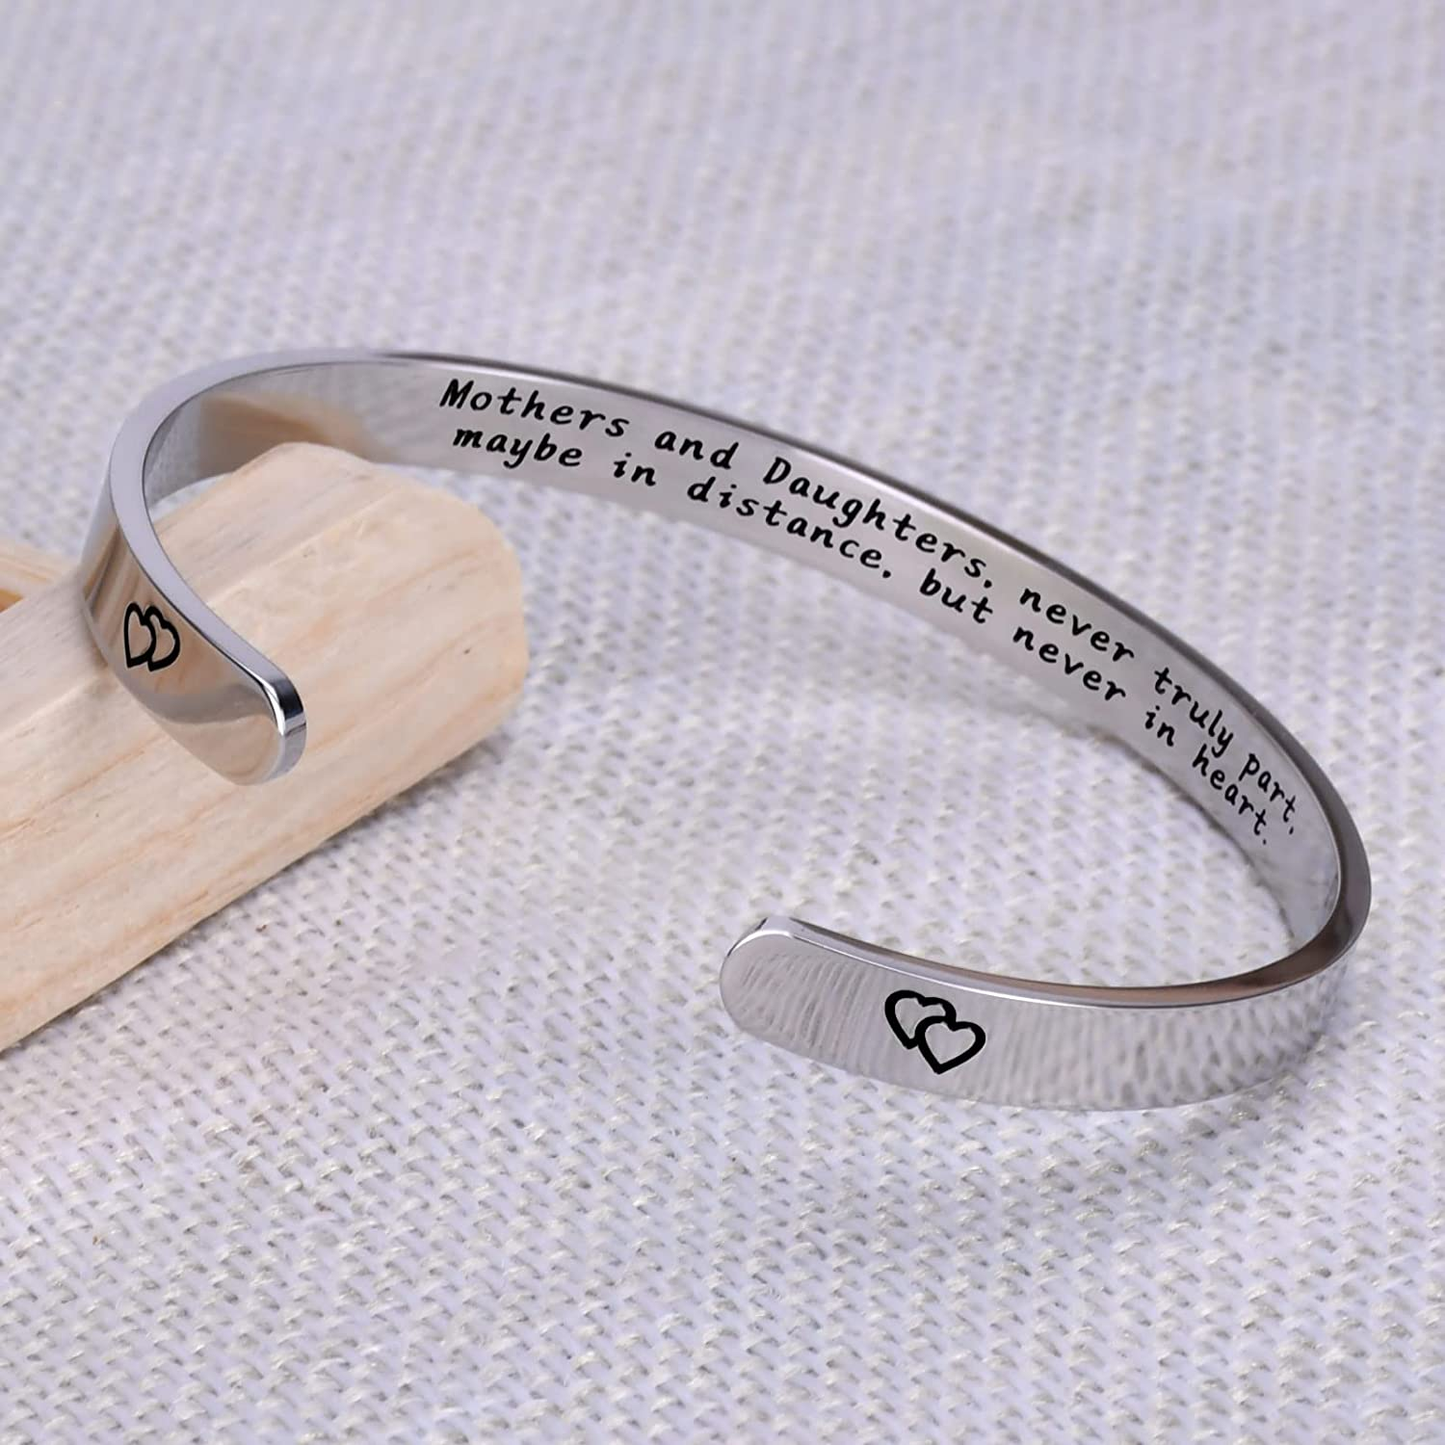 Mothers Day Gifts for Mom,Mom Gifts for Women Cuff Bracelet,Gifts for Mom from Daughter Son Jewelry Bracelet Cuff Bangle,Mothers Day/Birthday/Christmas for Best Mom Unique Funny Personalized Gifts